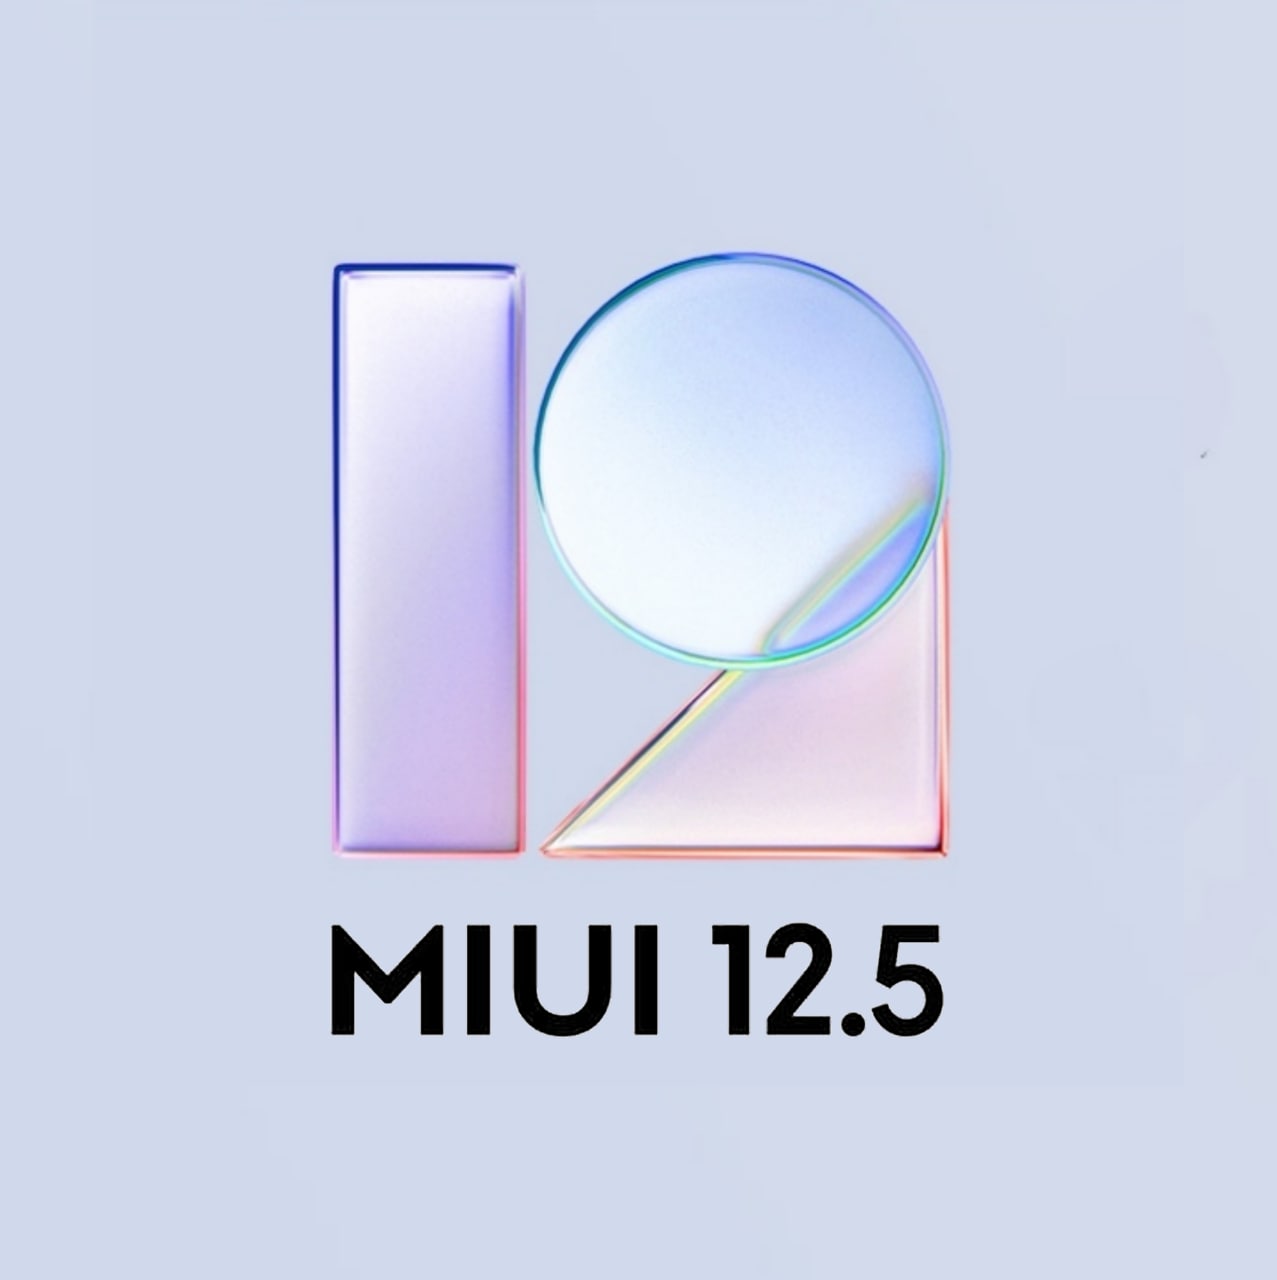 Stable MIUI 12.5 update for the Mi 10 and Mi 10 Pro